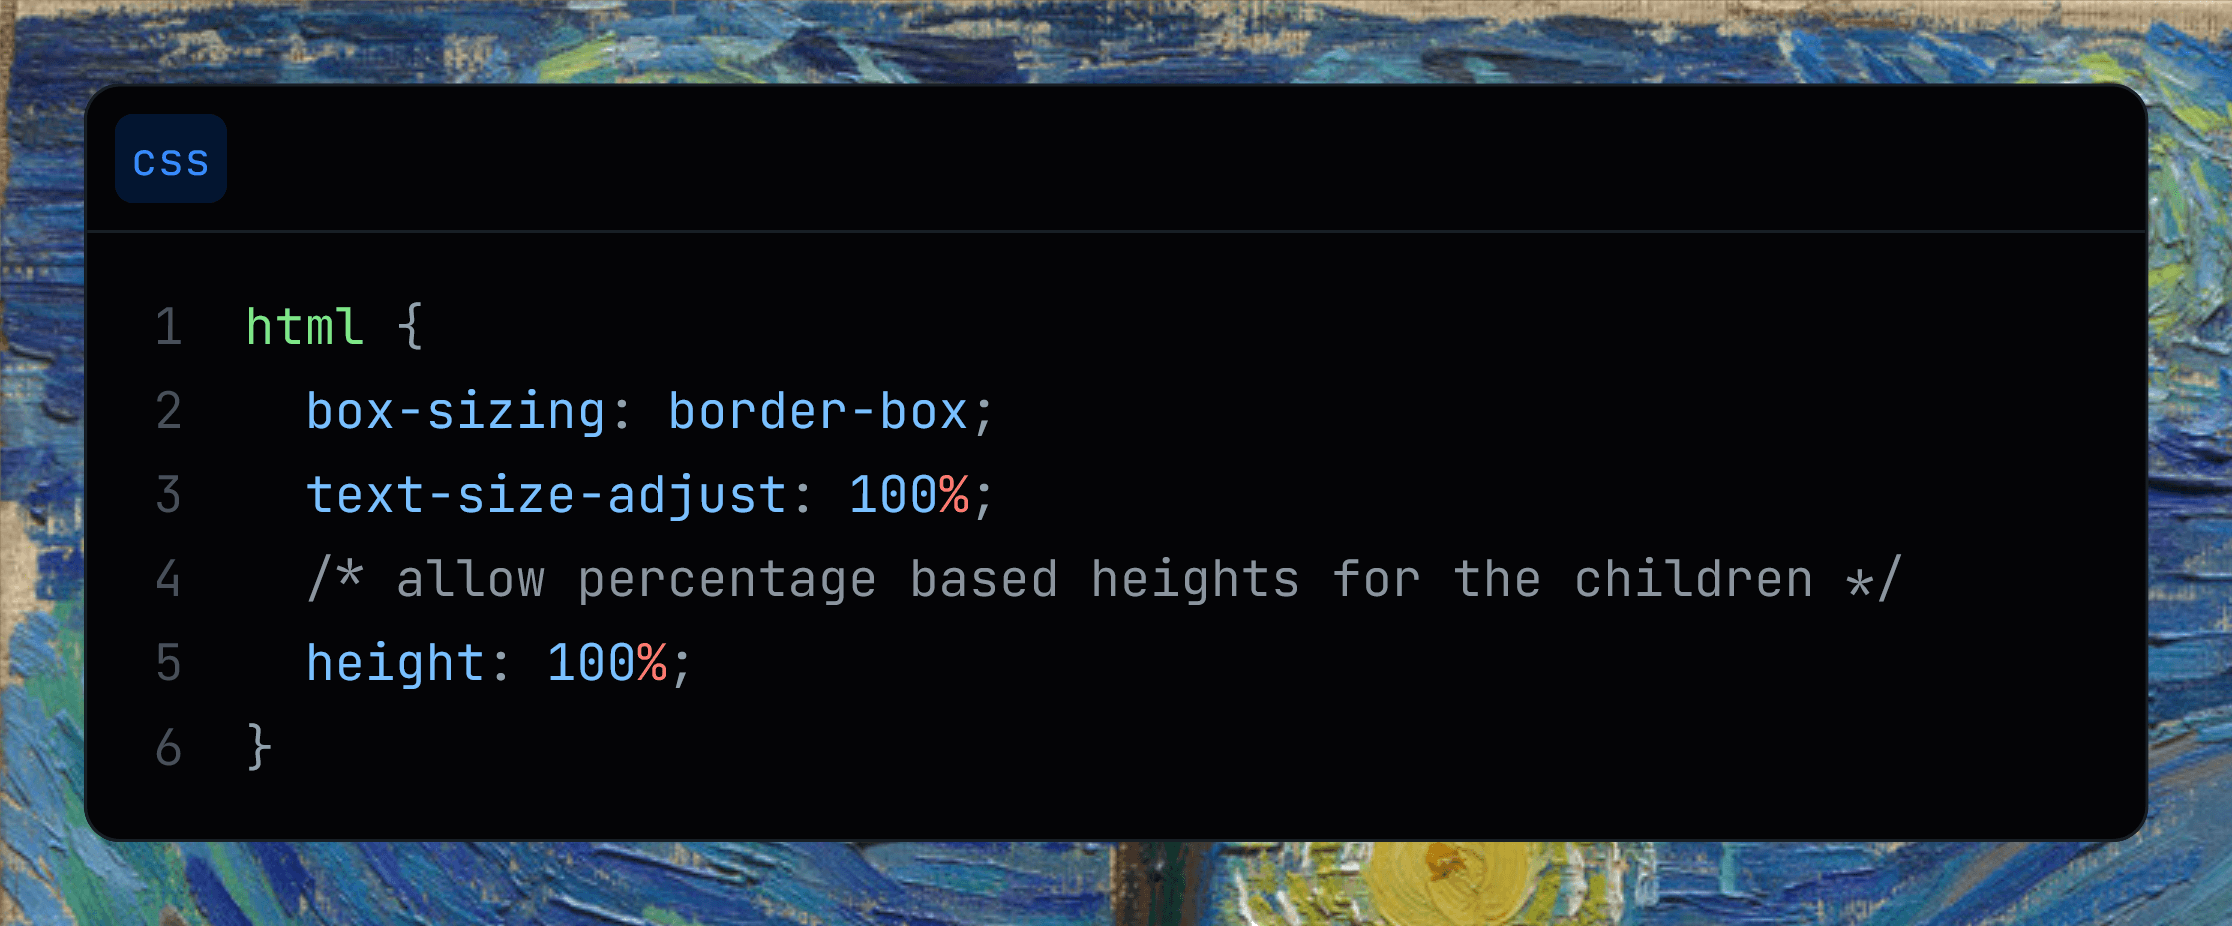 Syntax highlighting with Starry Night